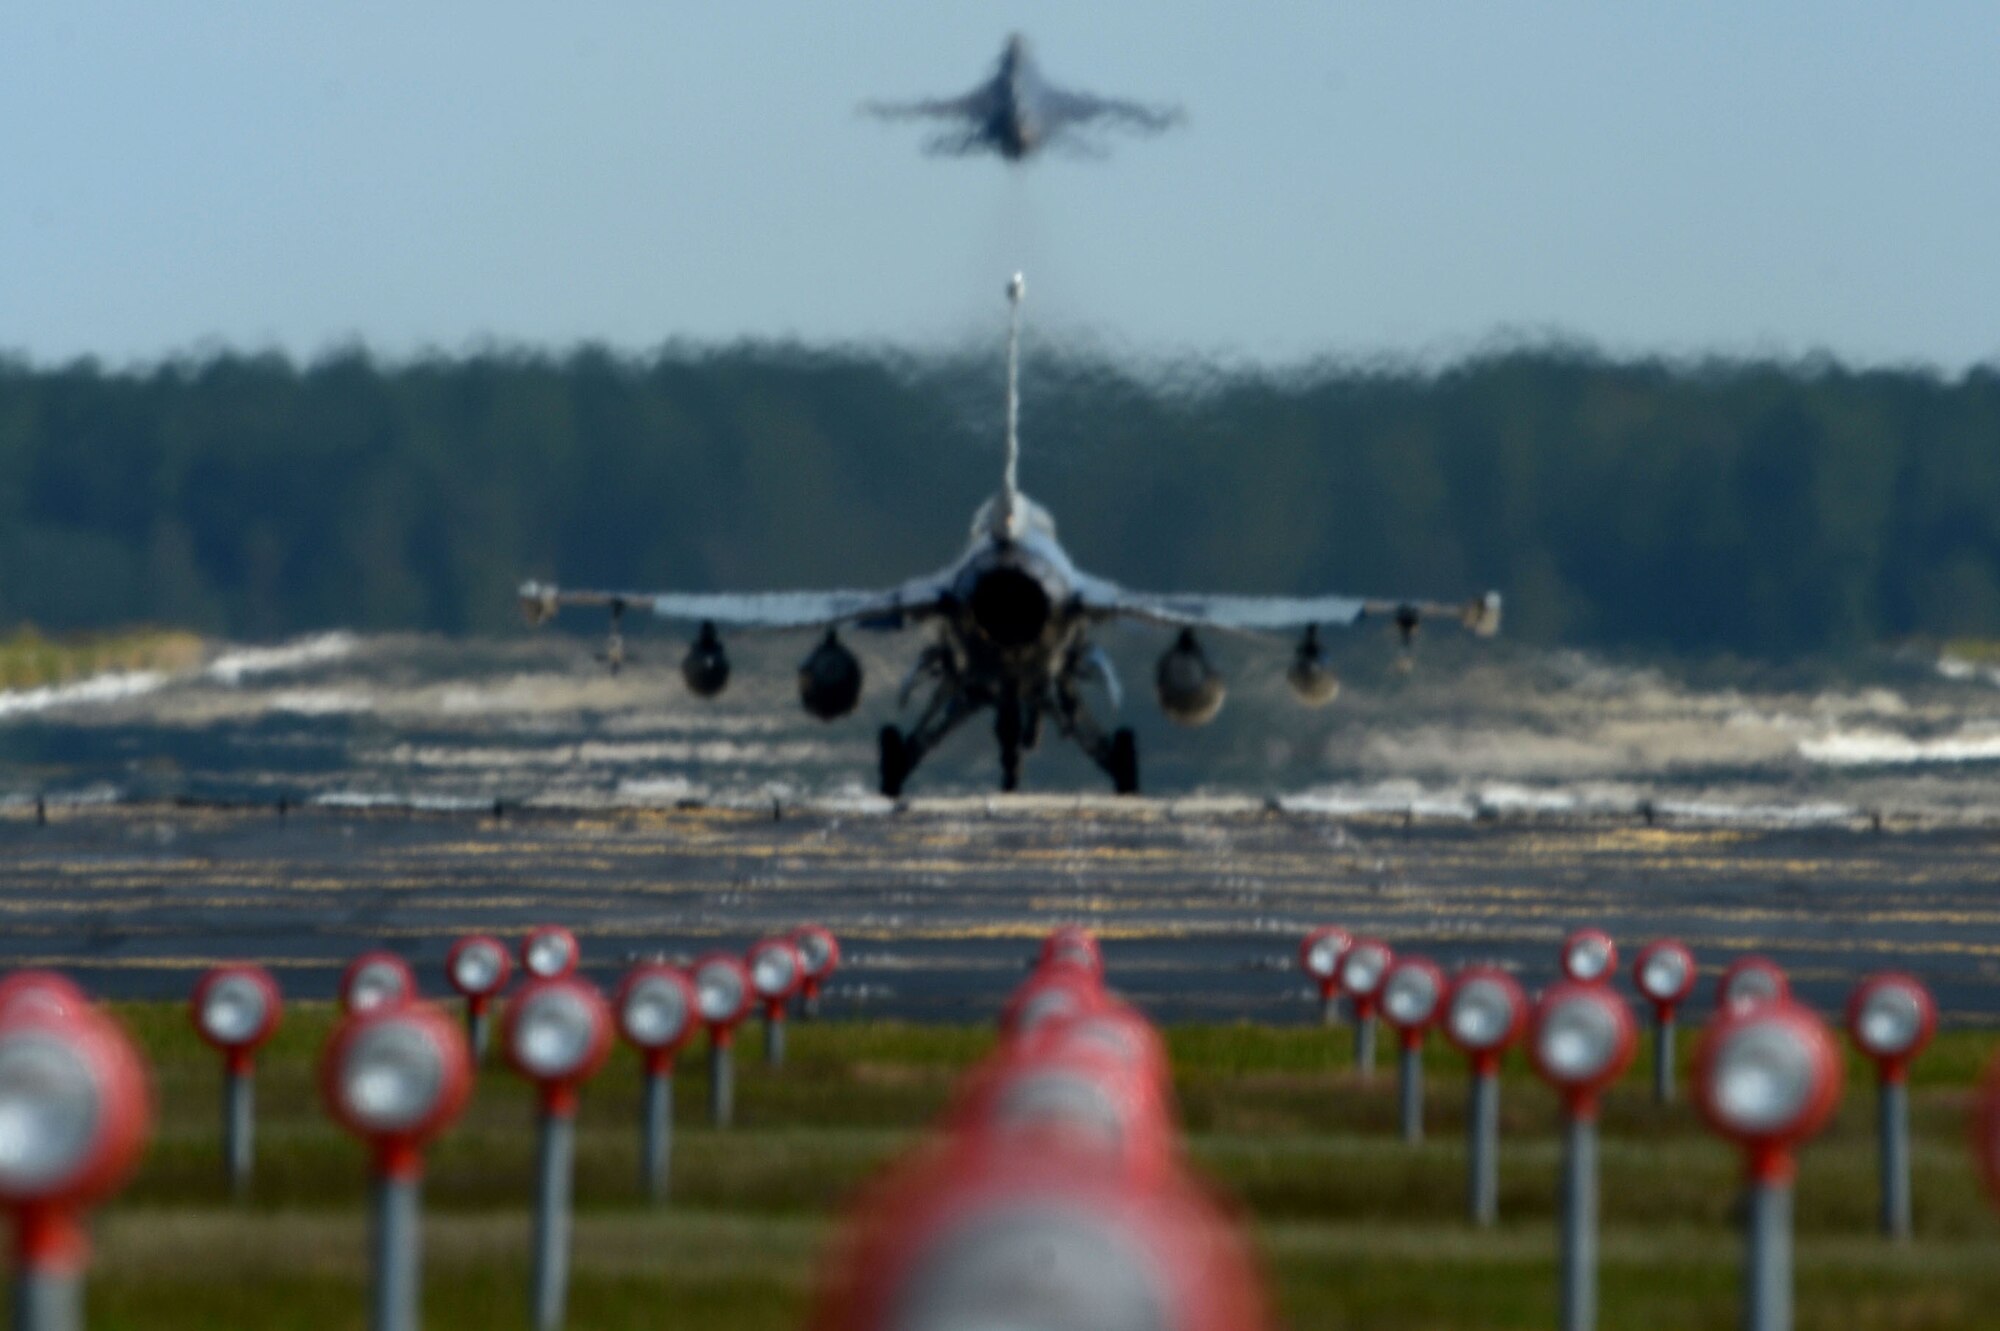 A U.S. Air Force F-16CM Fighting Falcon takes off from Shaw Air Force Base, S.C., Oct. 6, 2016. Shaw evacuated its aircraft following Gov. Nikki Haley’s declaration of a state of emergency in anticipation of Hurricane Matthew. (U.S. Air Force photo by Senior Airman Michael Cossaboom)